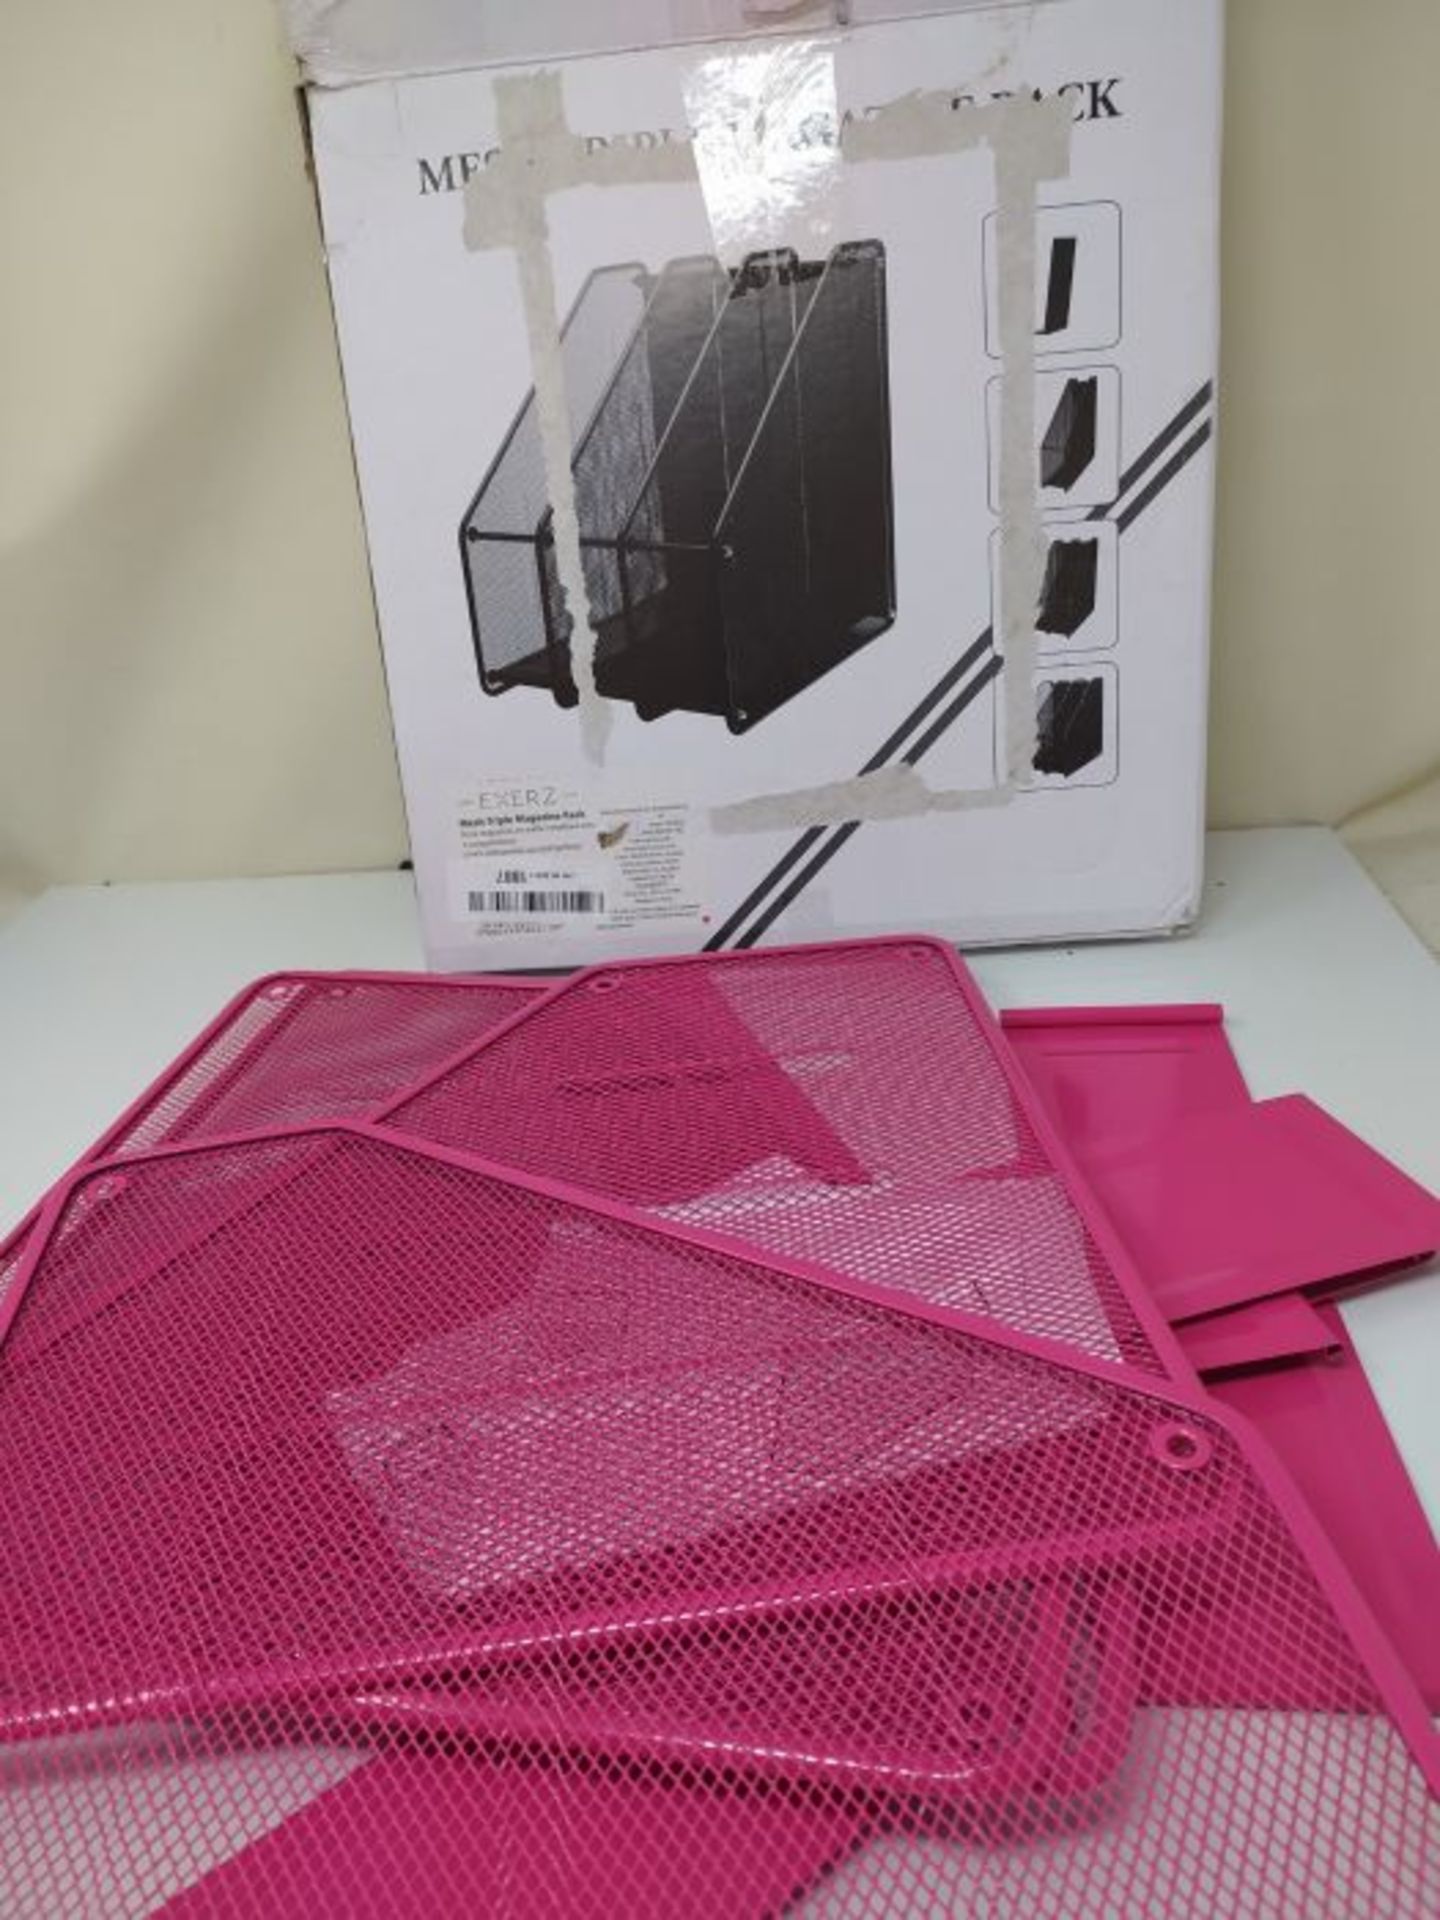 EXERZ Magazine Holder Triple Rack, Mesh Metal - 3 Compartments Documents/Notebooks/Fol - Image 2 of 2